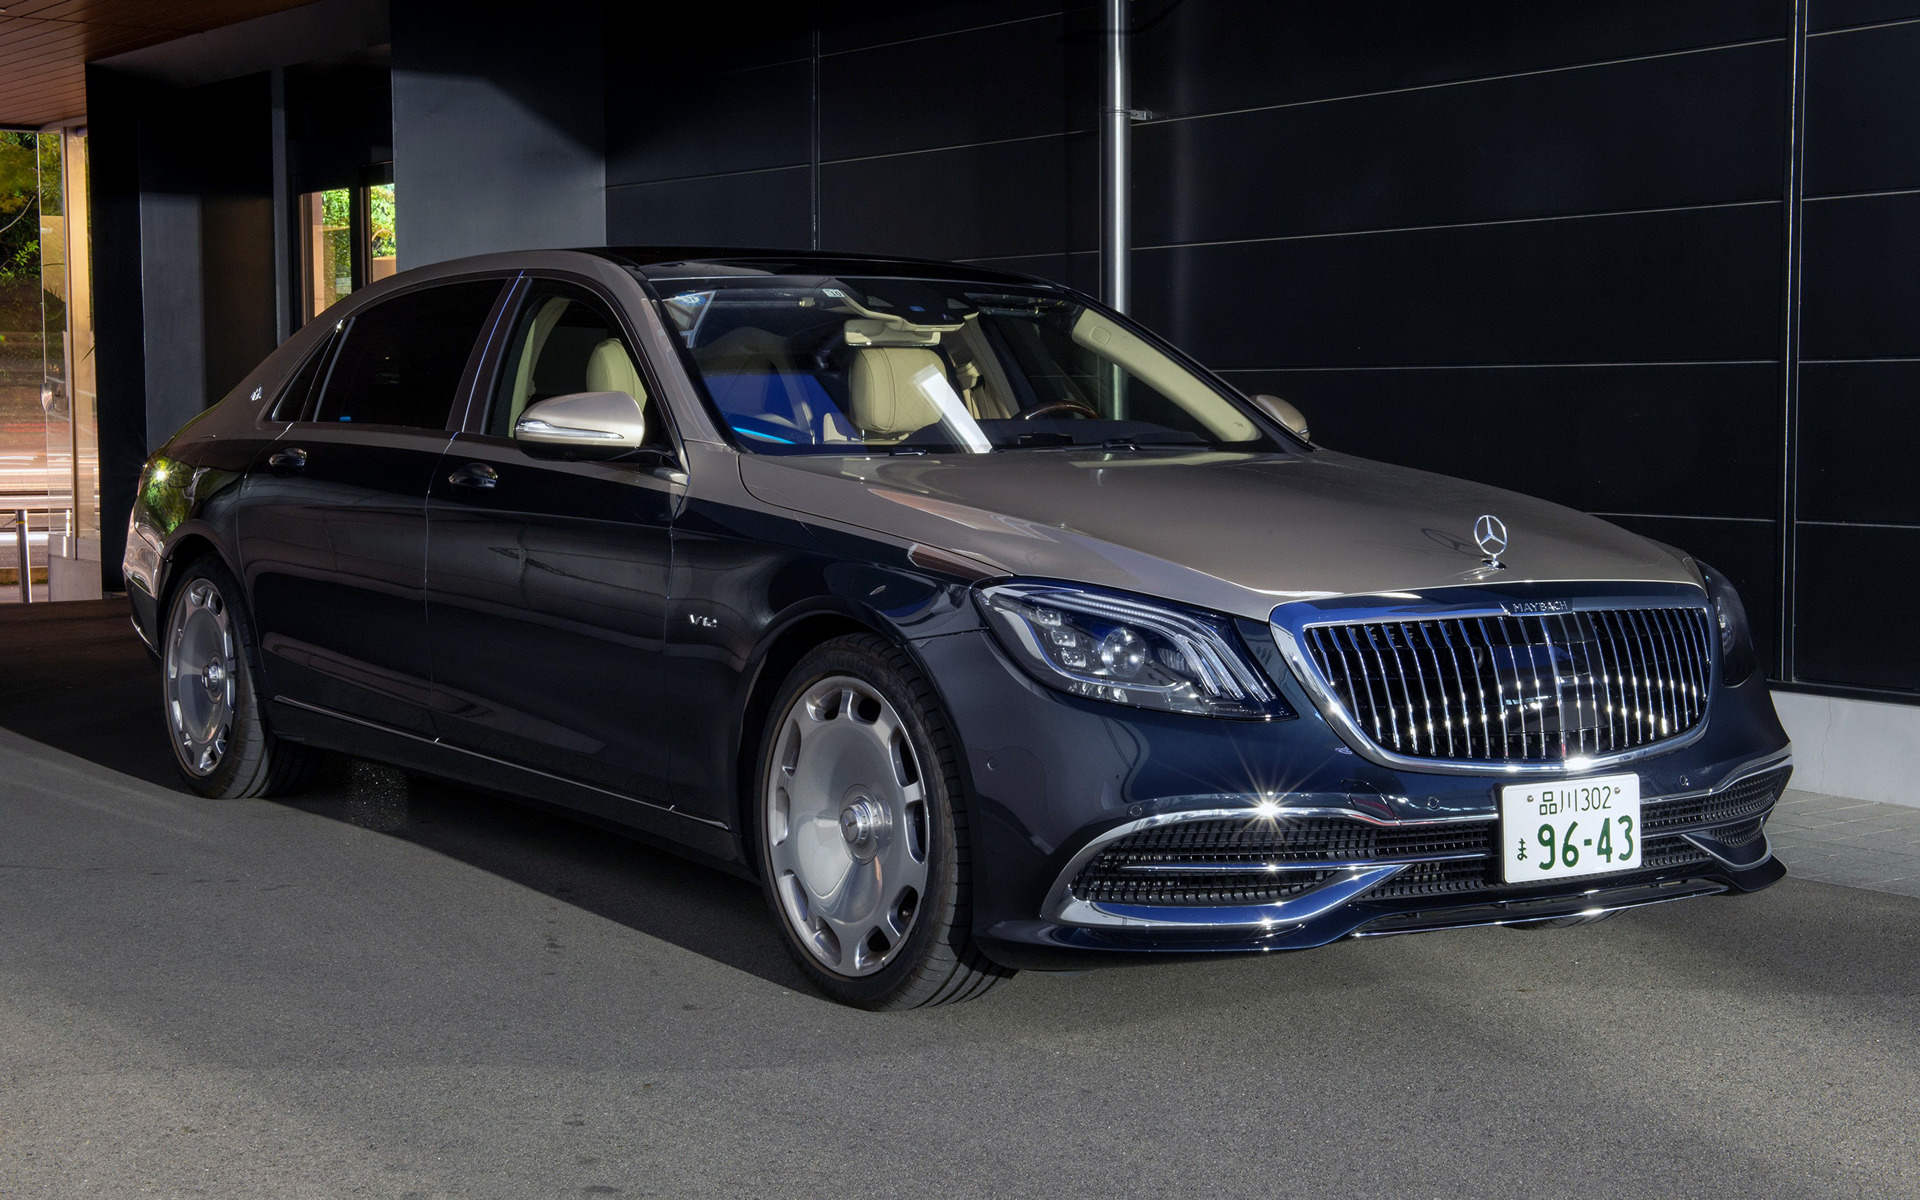 2019 Mercedes-Maybach S-Class (JP) - Wallpapers and HD Images | Car Pixel